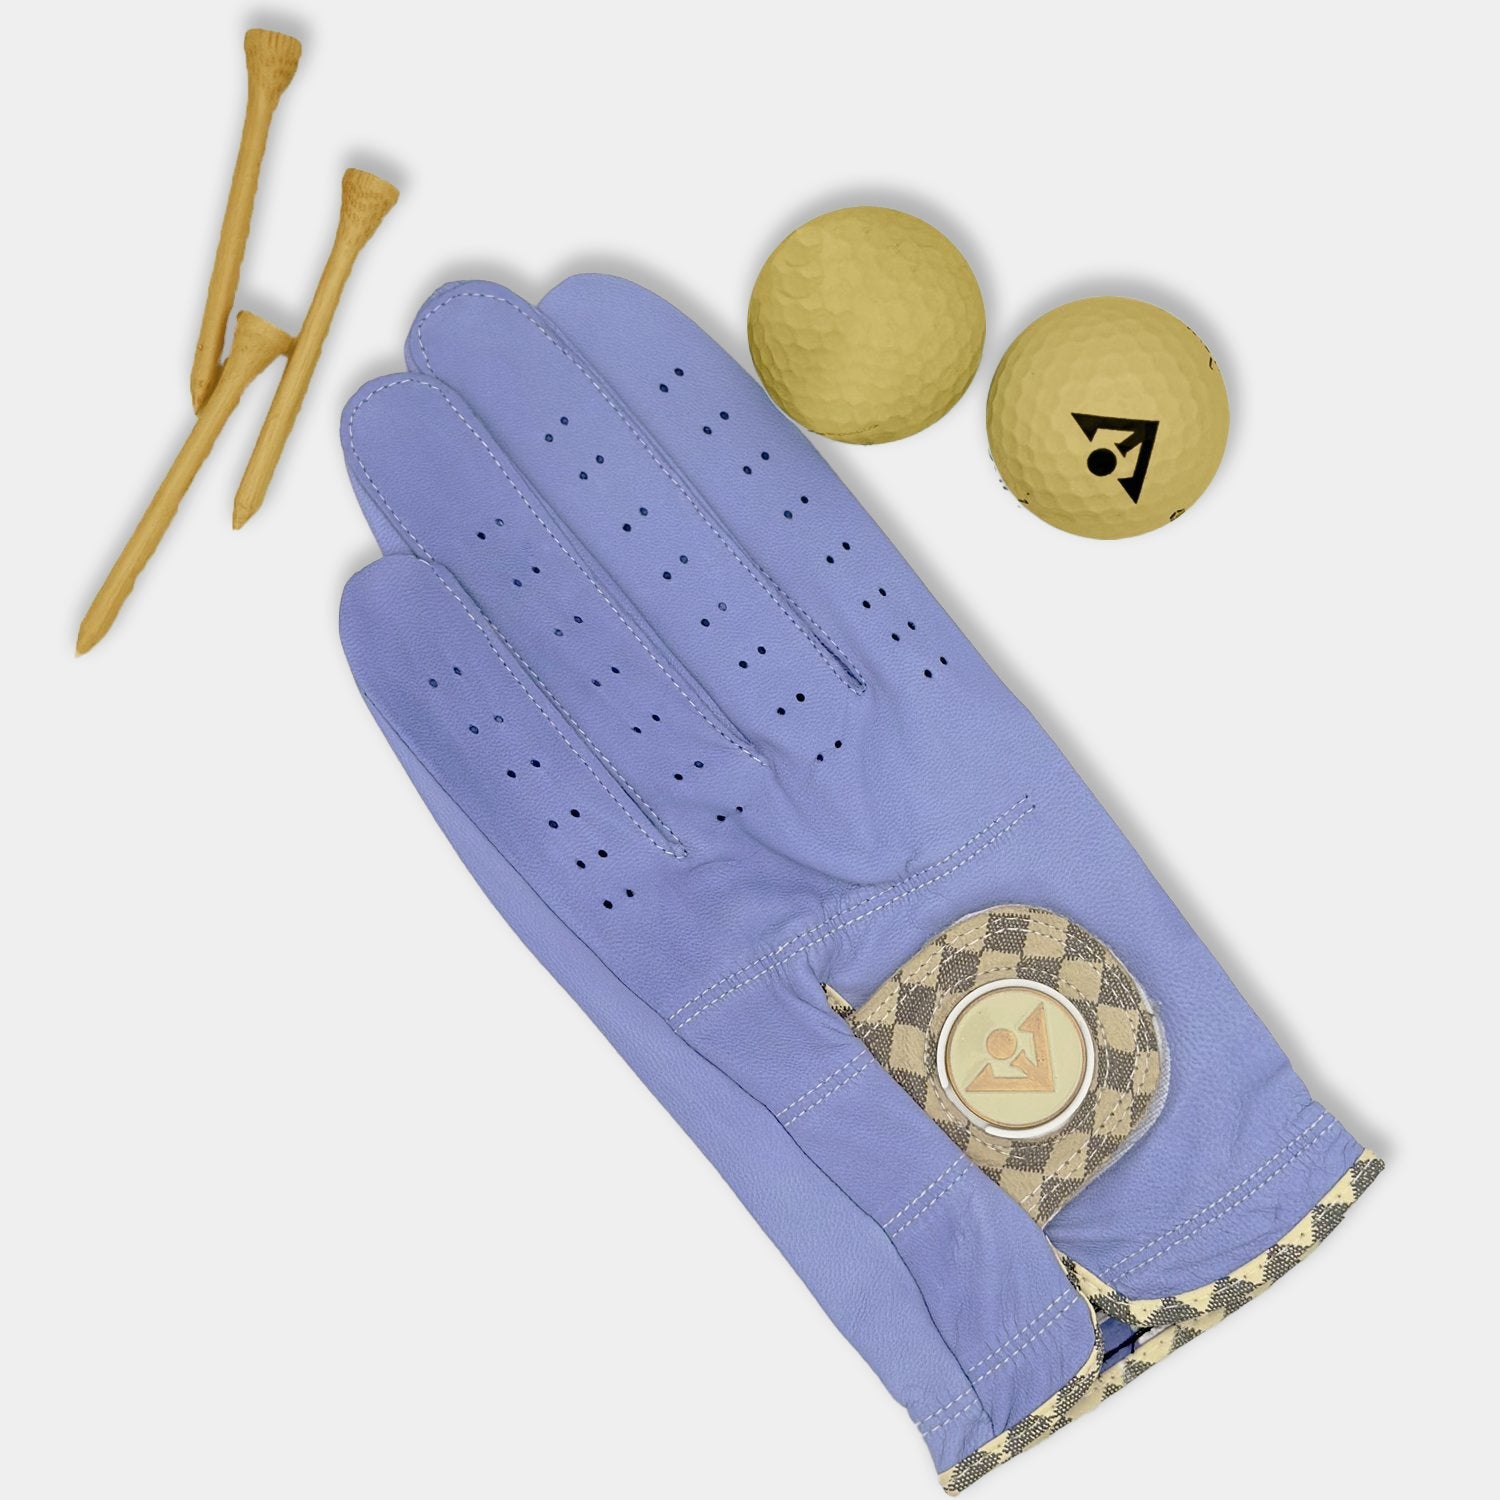 Women's Purple golf glove with lavendar and tan checks. Designer purple golf glove for women.